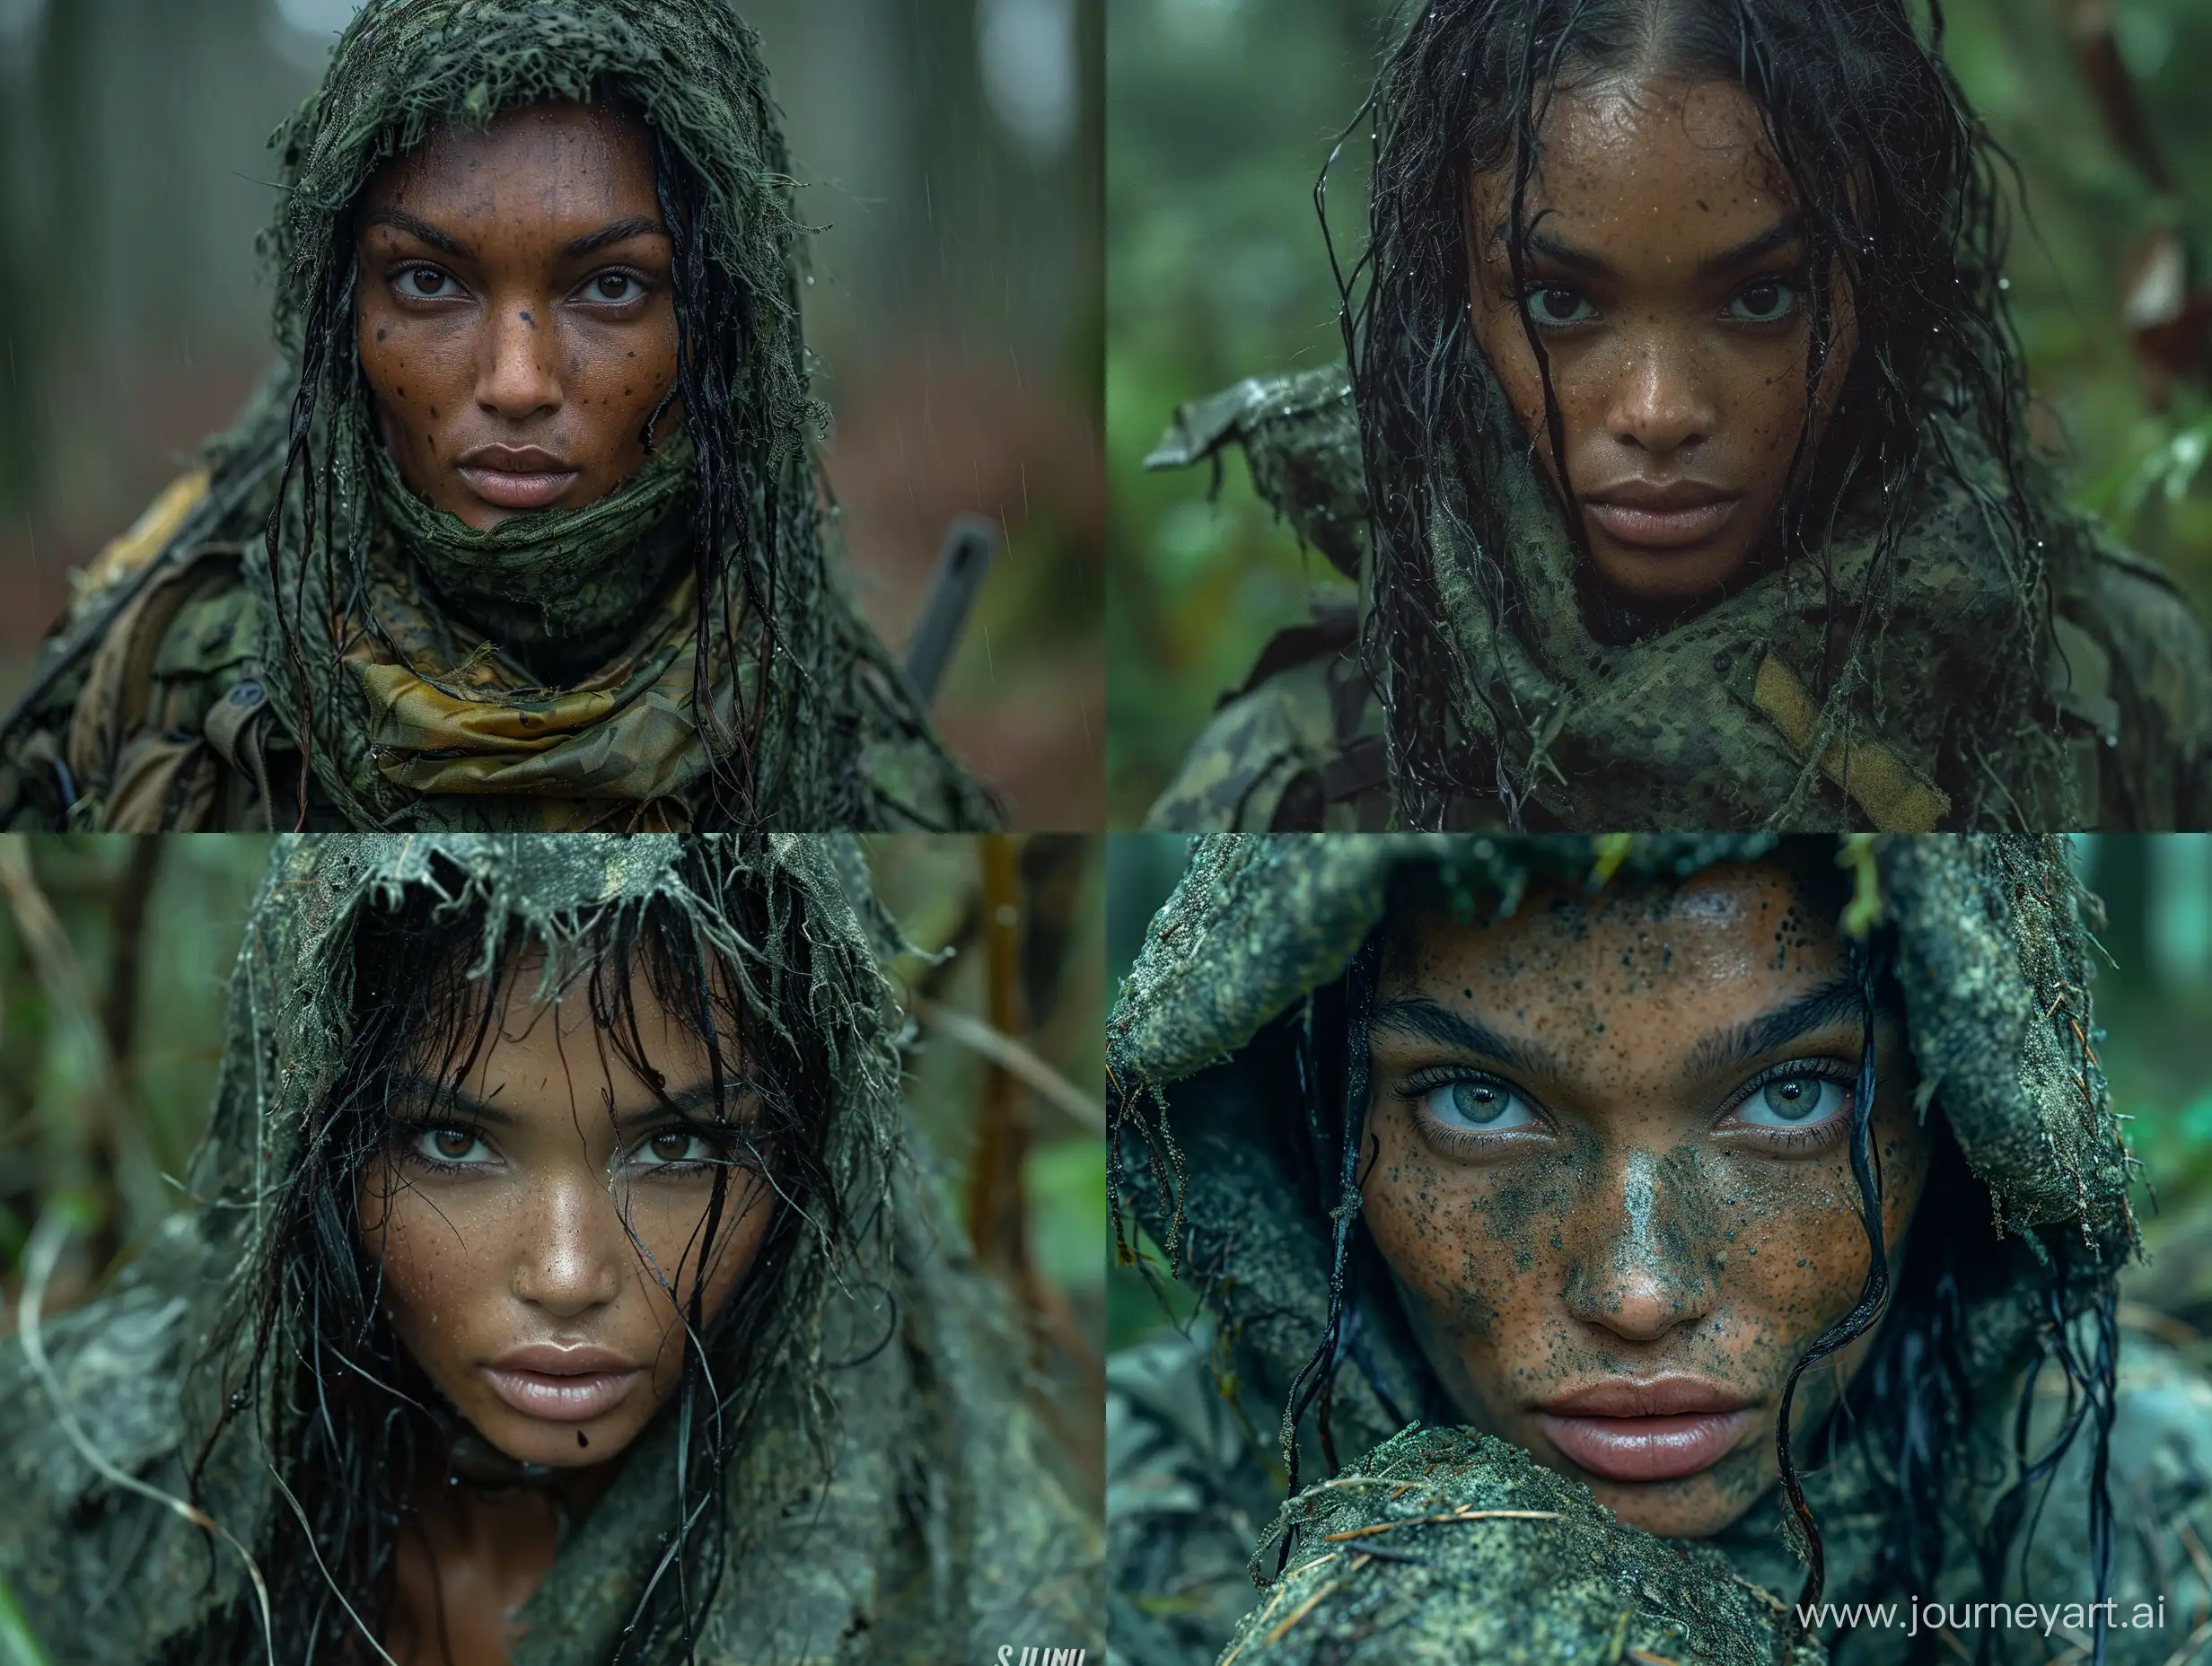 Sultry-Mulatto-Female-Mercenary-in-Green-Ghillie-Suit-in-Mysterious-Dark-Forest